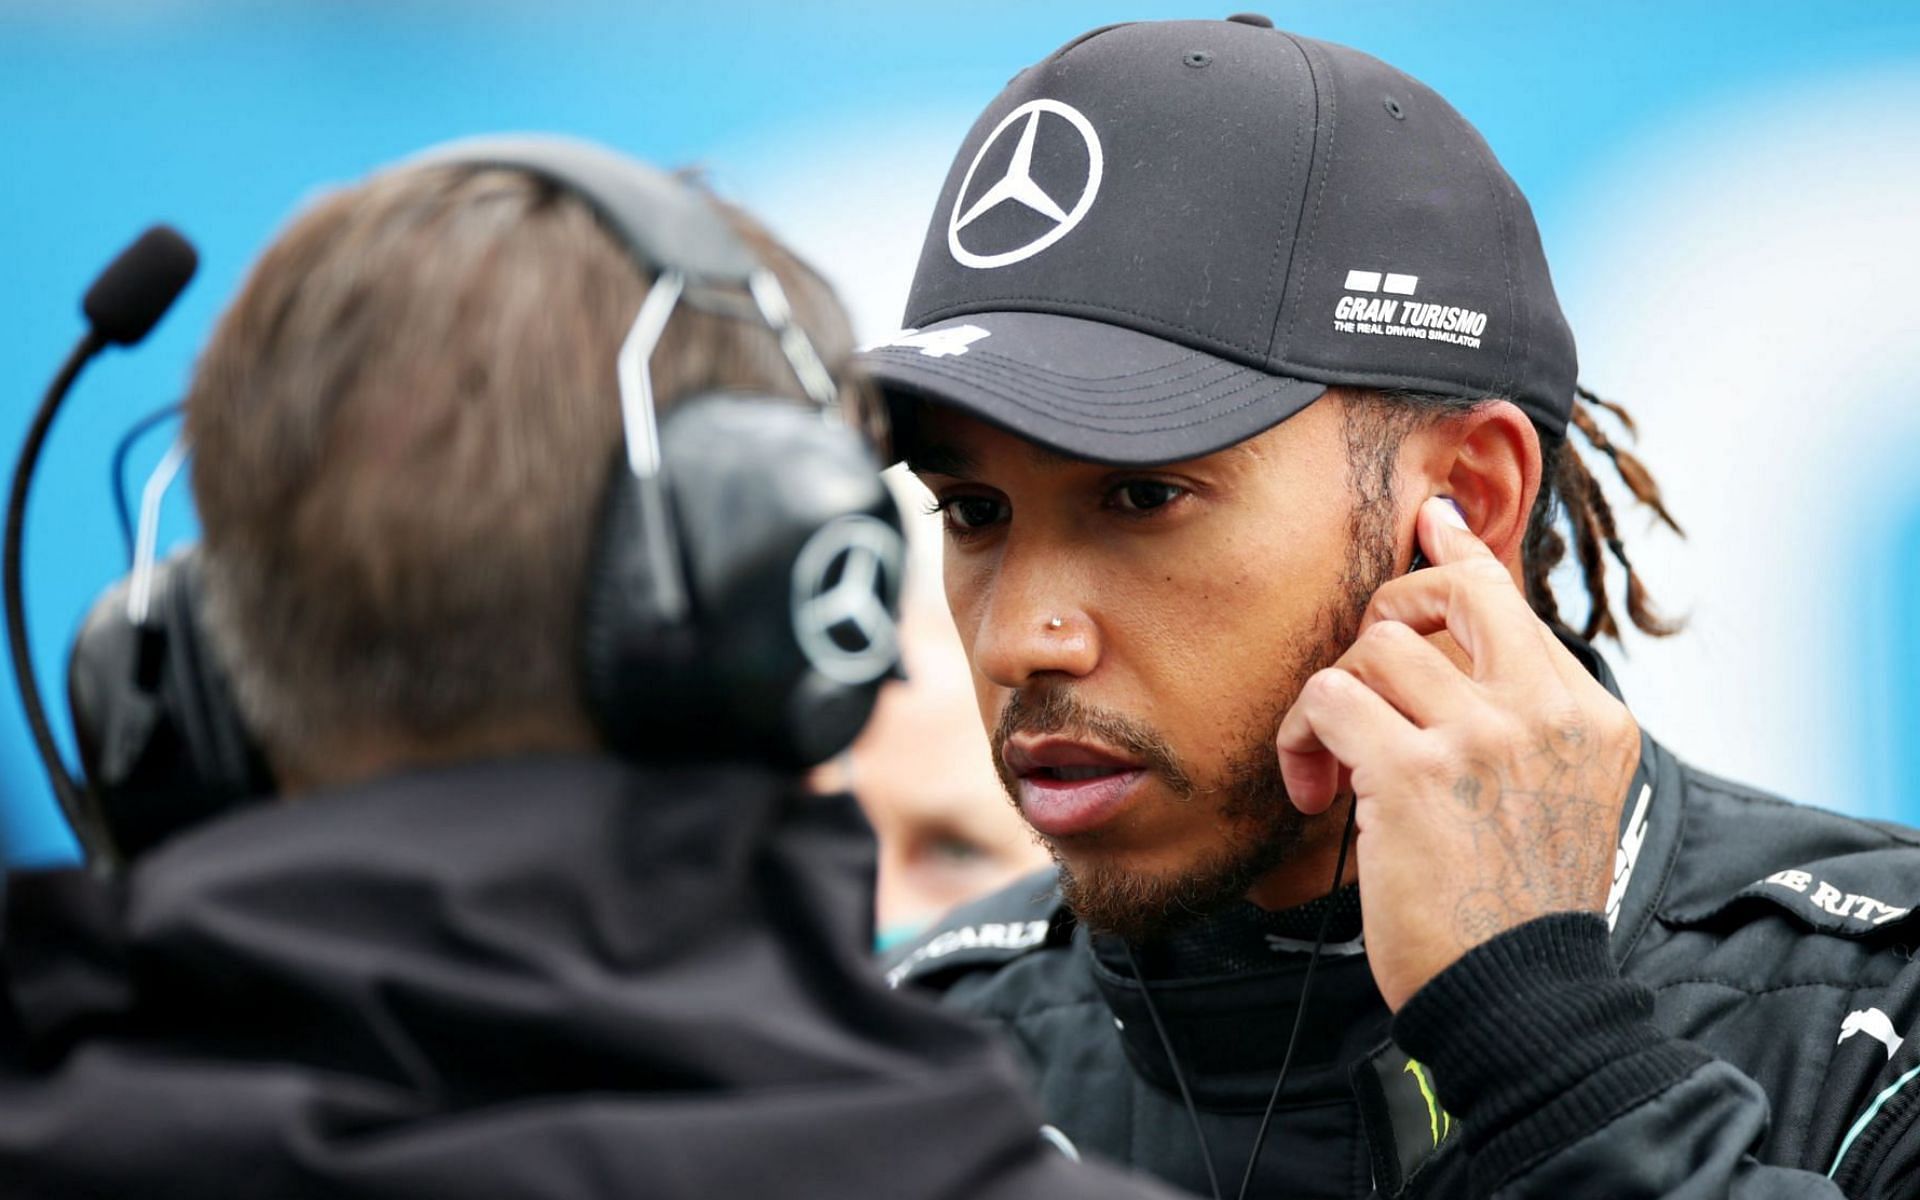 Lewis Hamilton interacts with his race engineer Peter Bonnington ahead of the 2021 San Marino Grand Prix